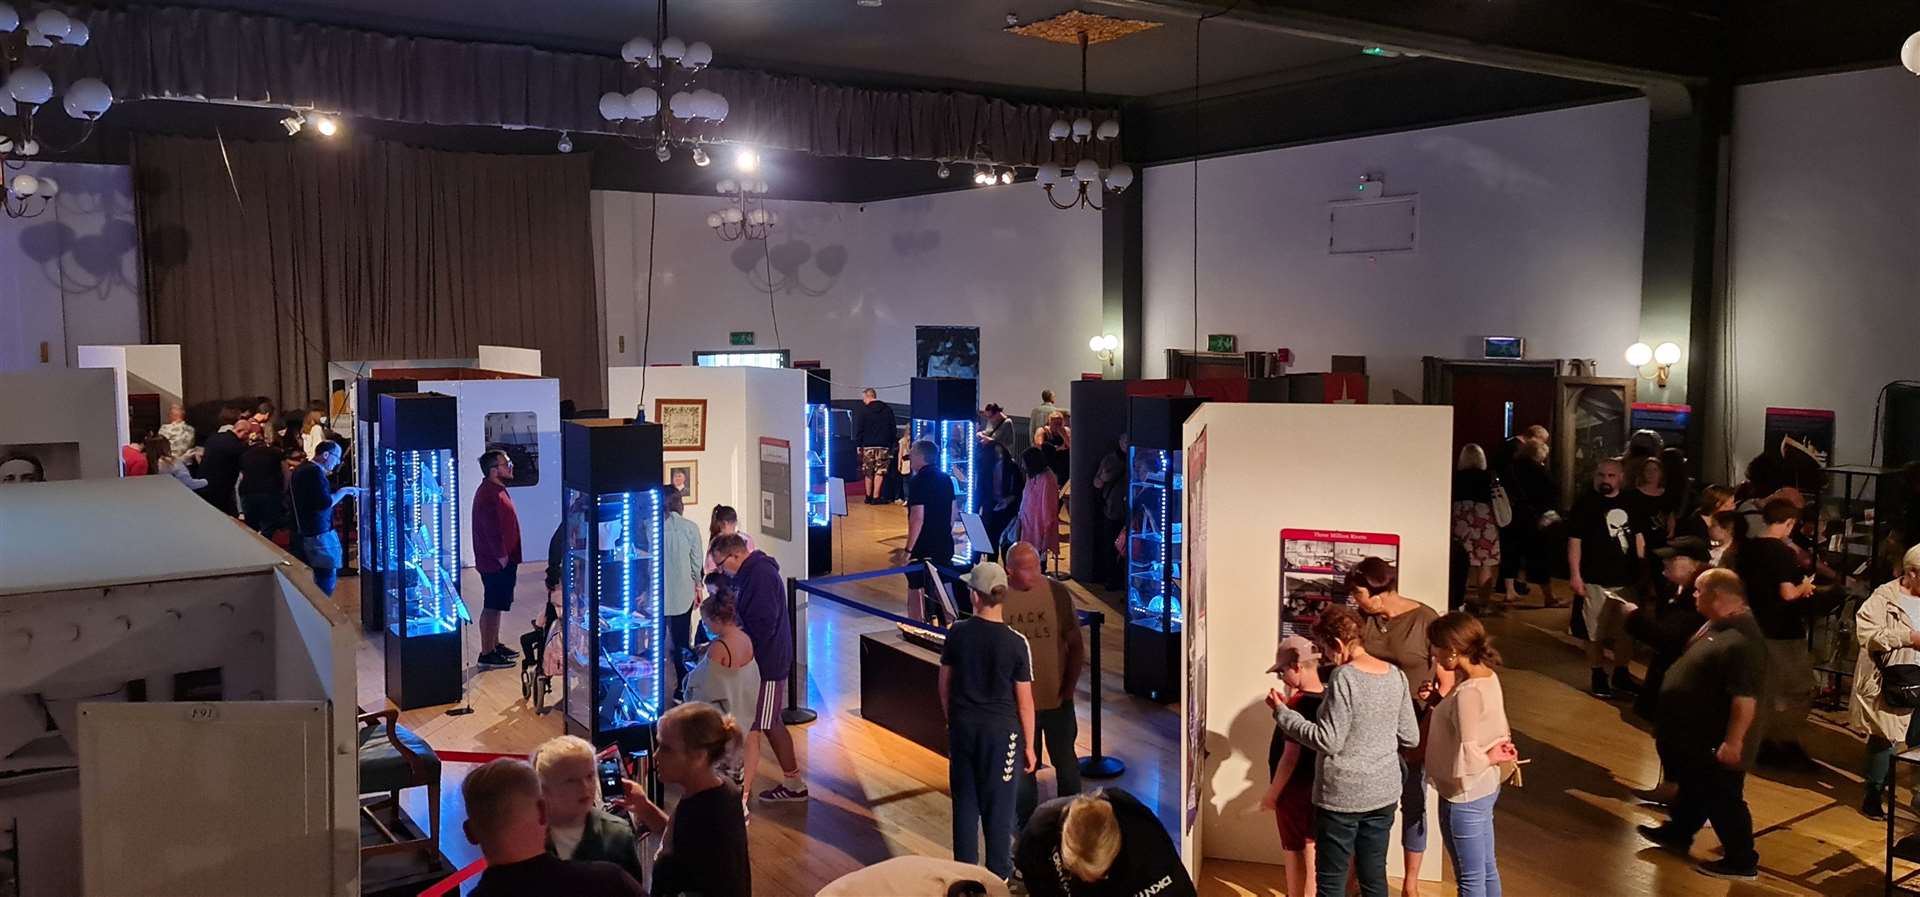 Organisers say the Titanic exhibition in Herne Bay was a resounding success that drew thousands of people to the town